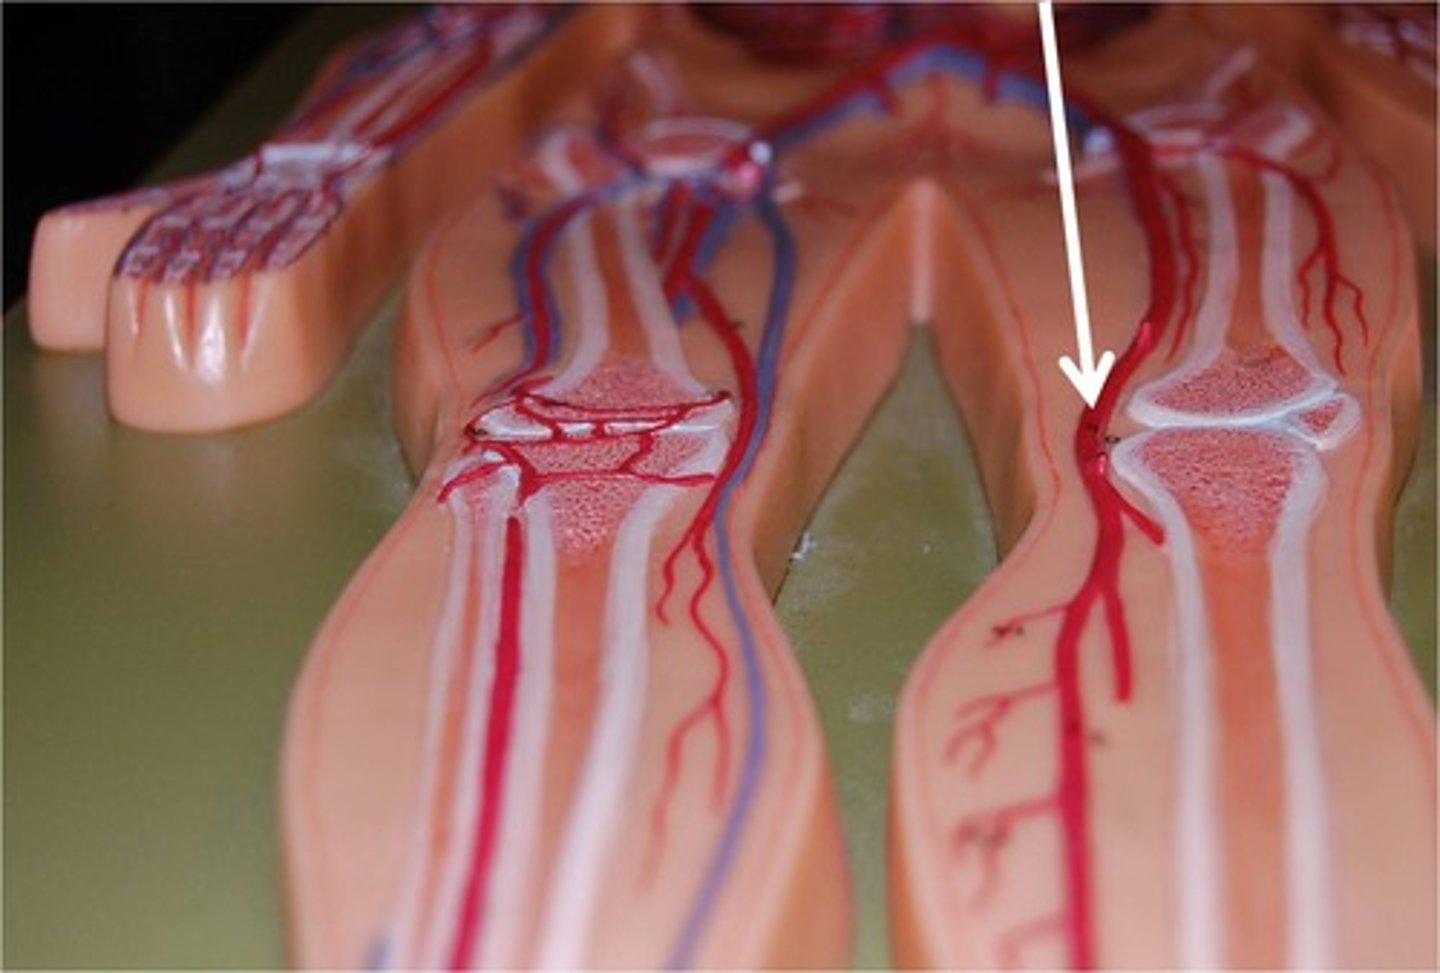 <p>continuation of femoral arteries that begin in the popliteal region and end in the upper leg where they divide into the anterior and posterior tibial arteries</p>